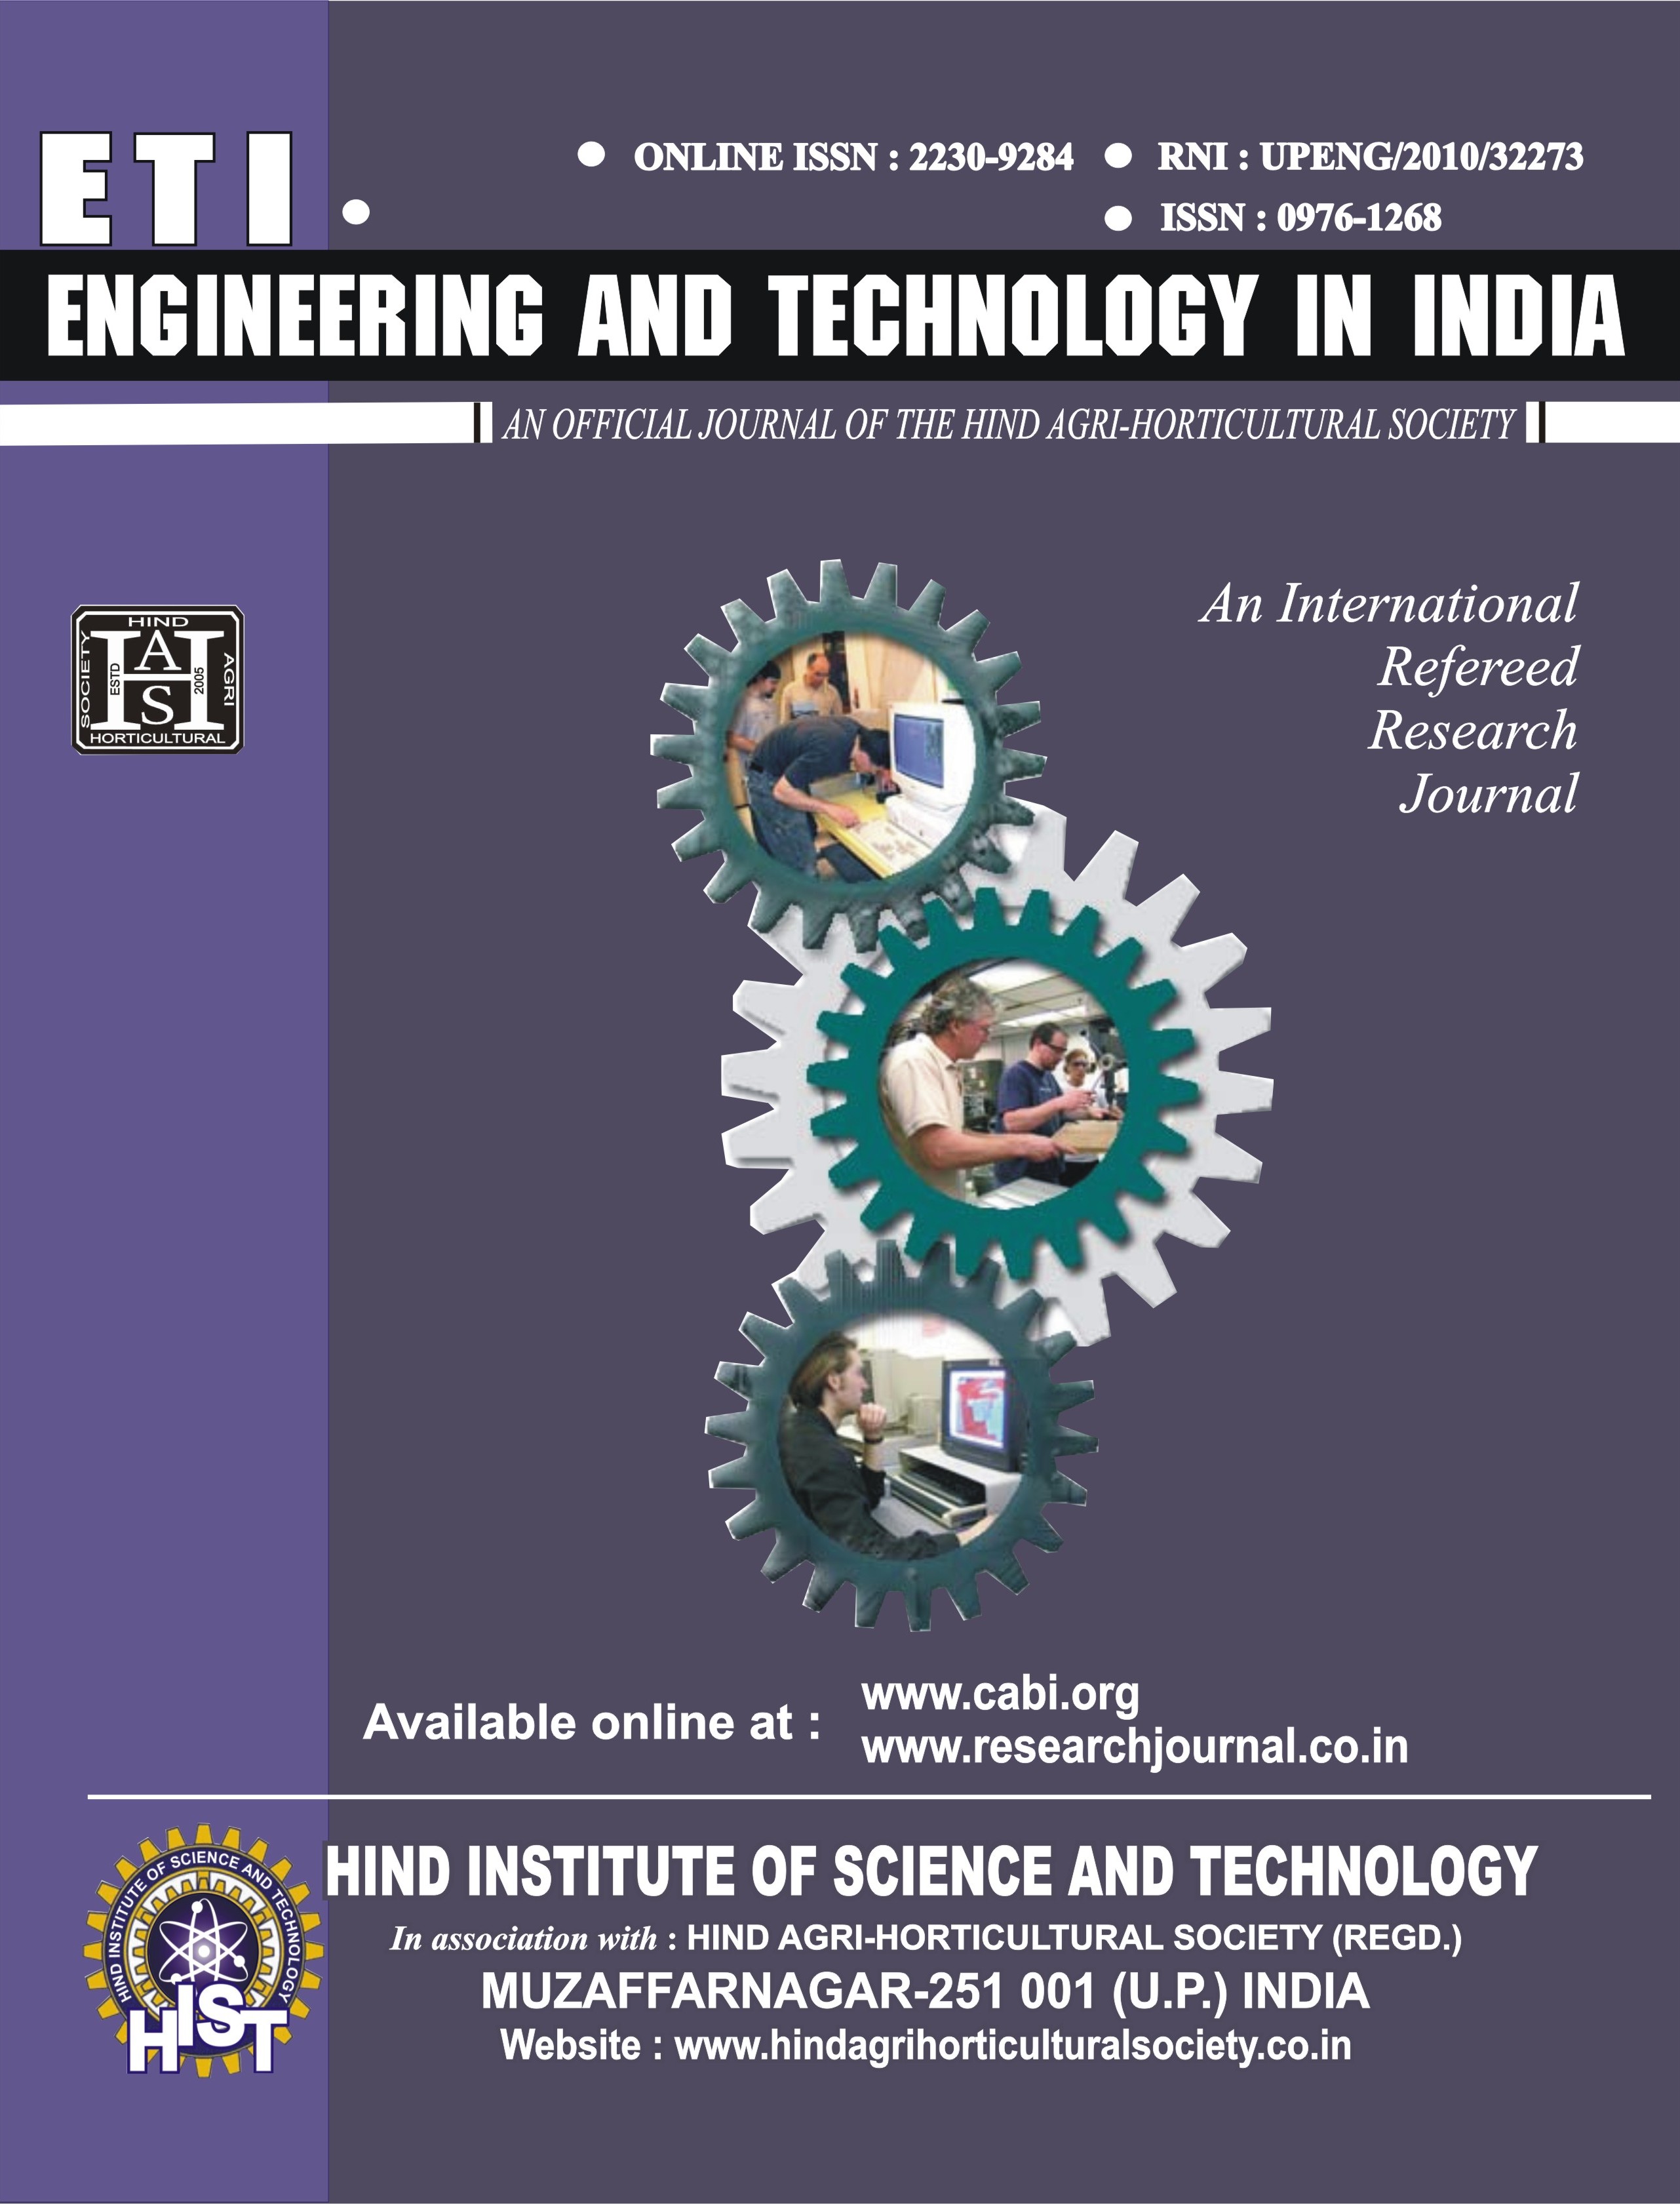 Engg. & Tech. in India